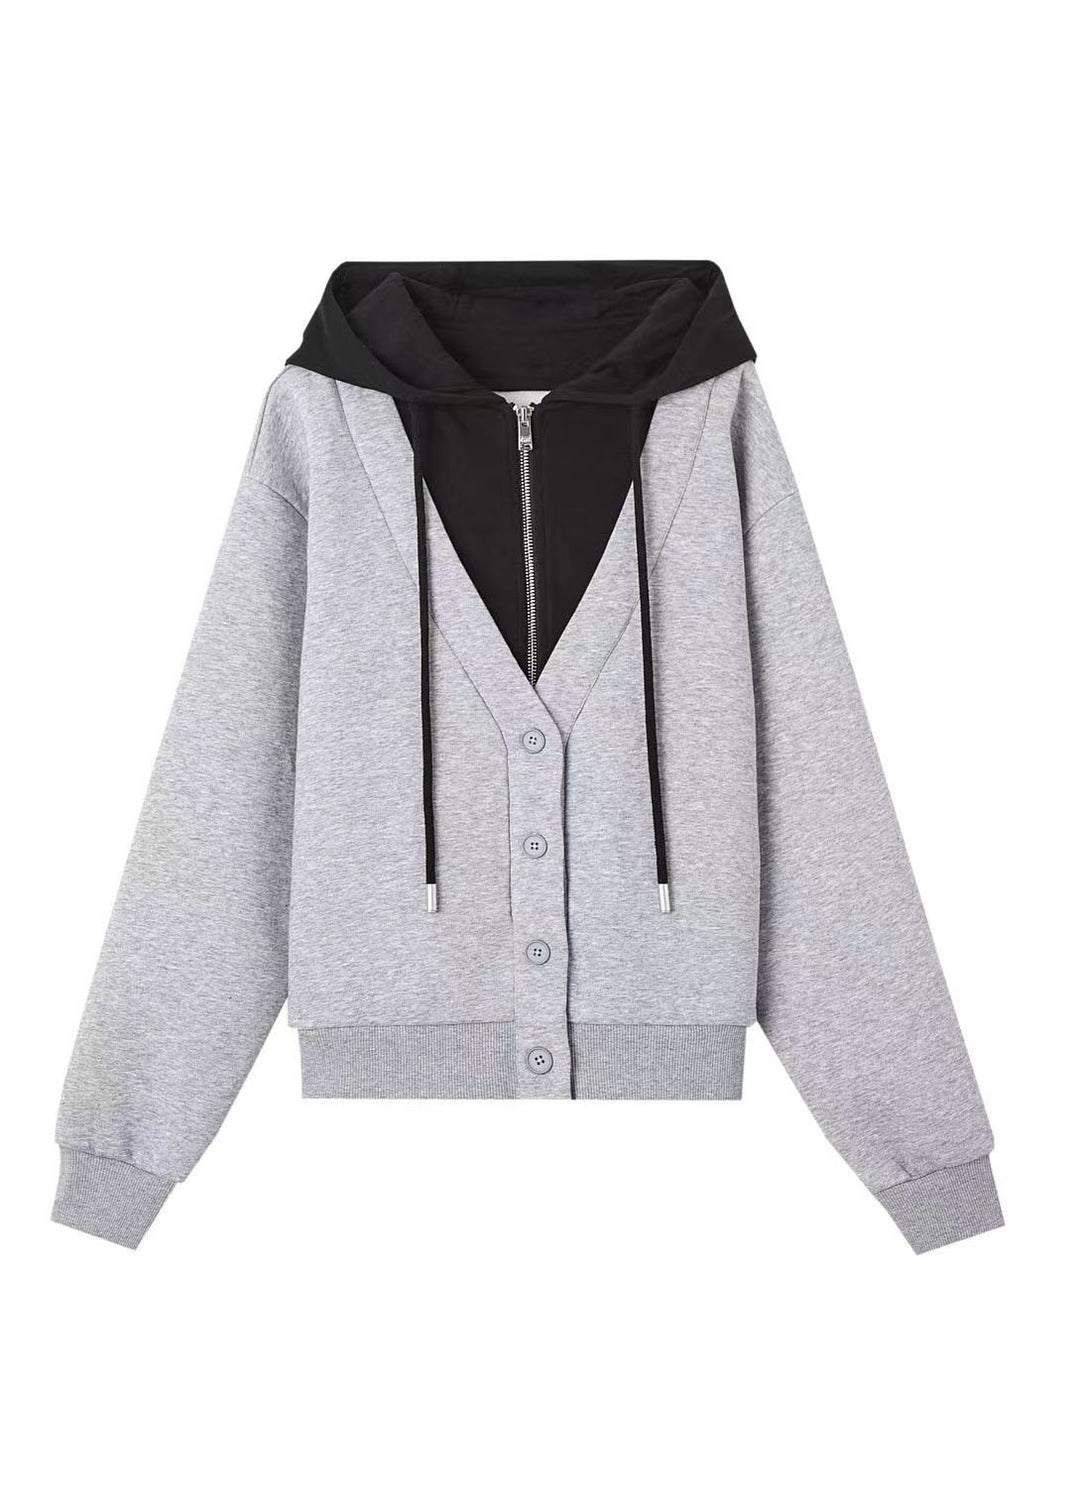 Style Grey Button Patchwork False Two Pieces Cotton Hooded Coat Fall